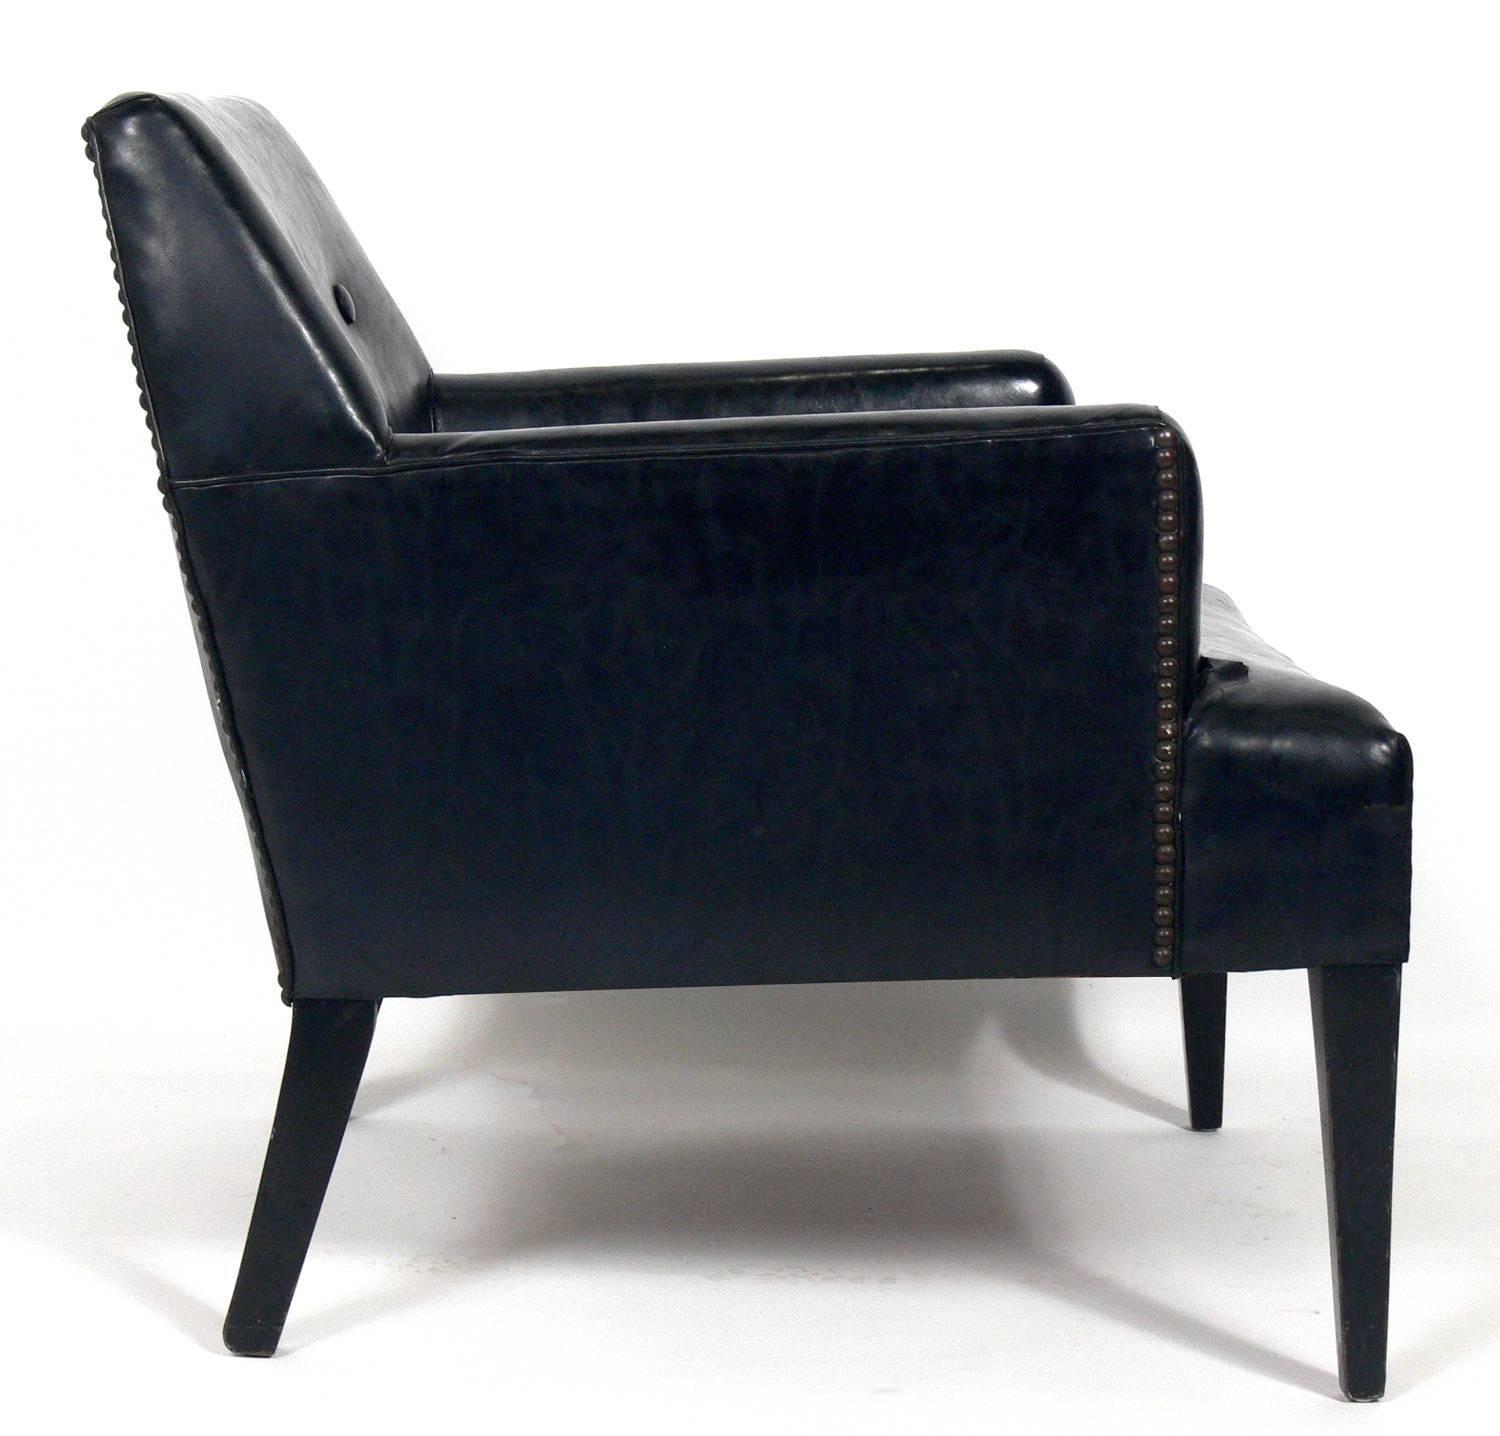 Angular Mid-Century Modern lounge chair, in the manner of Dunbar, American, circa 1950s. This chair is currently being reupholstered and refinished. It can be completed in your choice of finish color and in your fabric. The price noted below